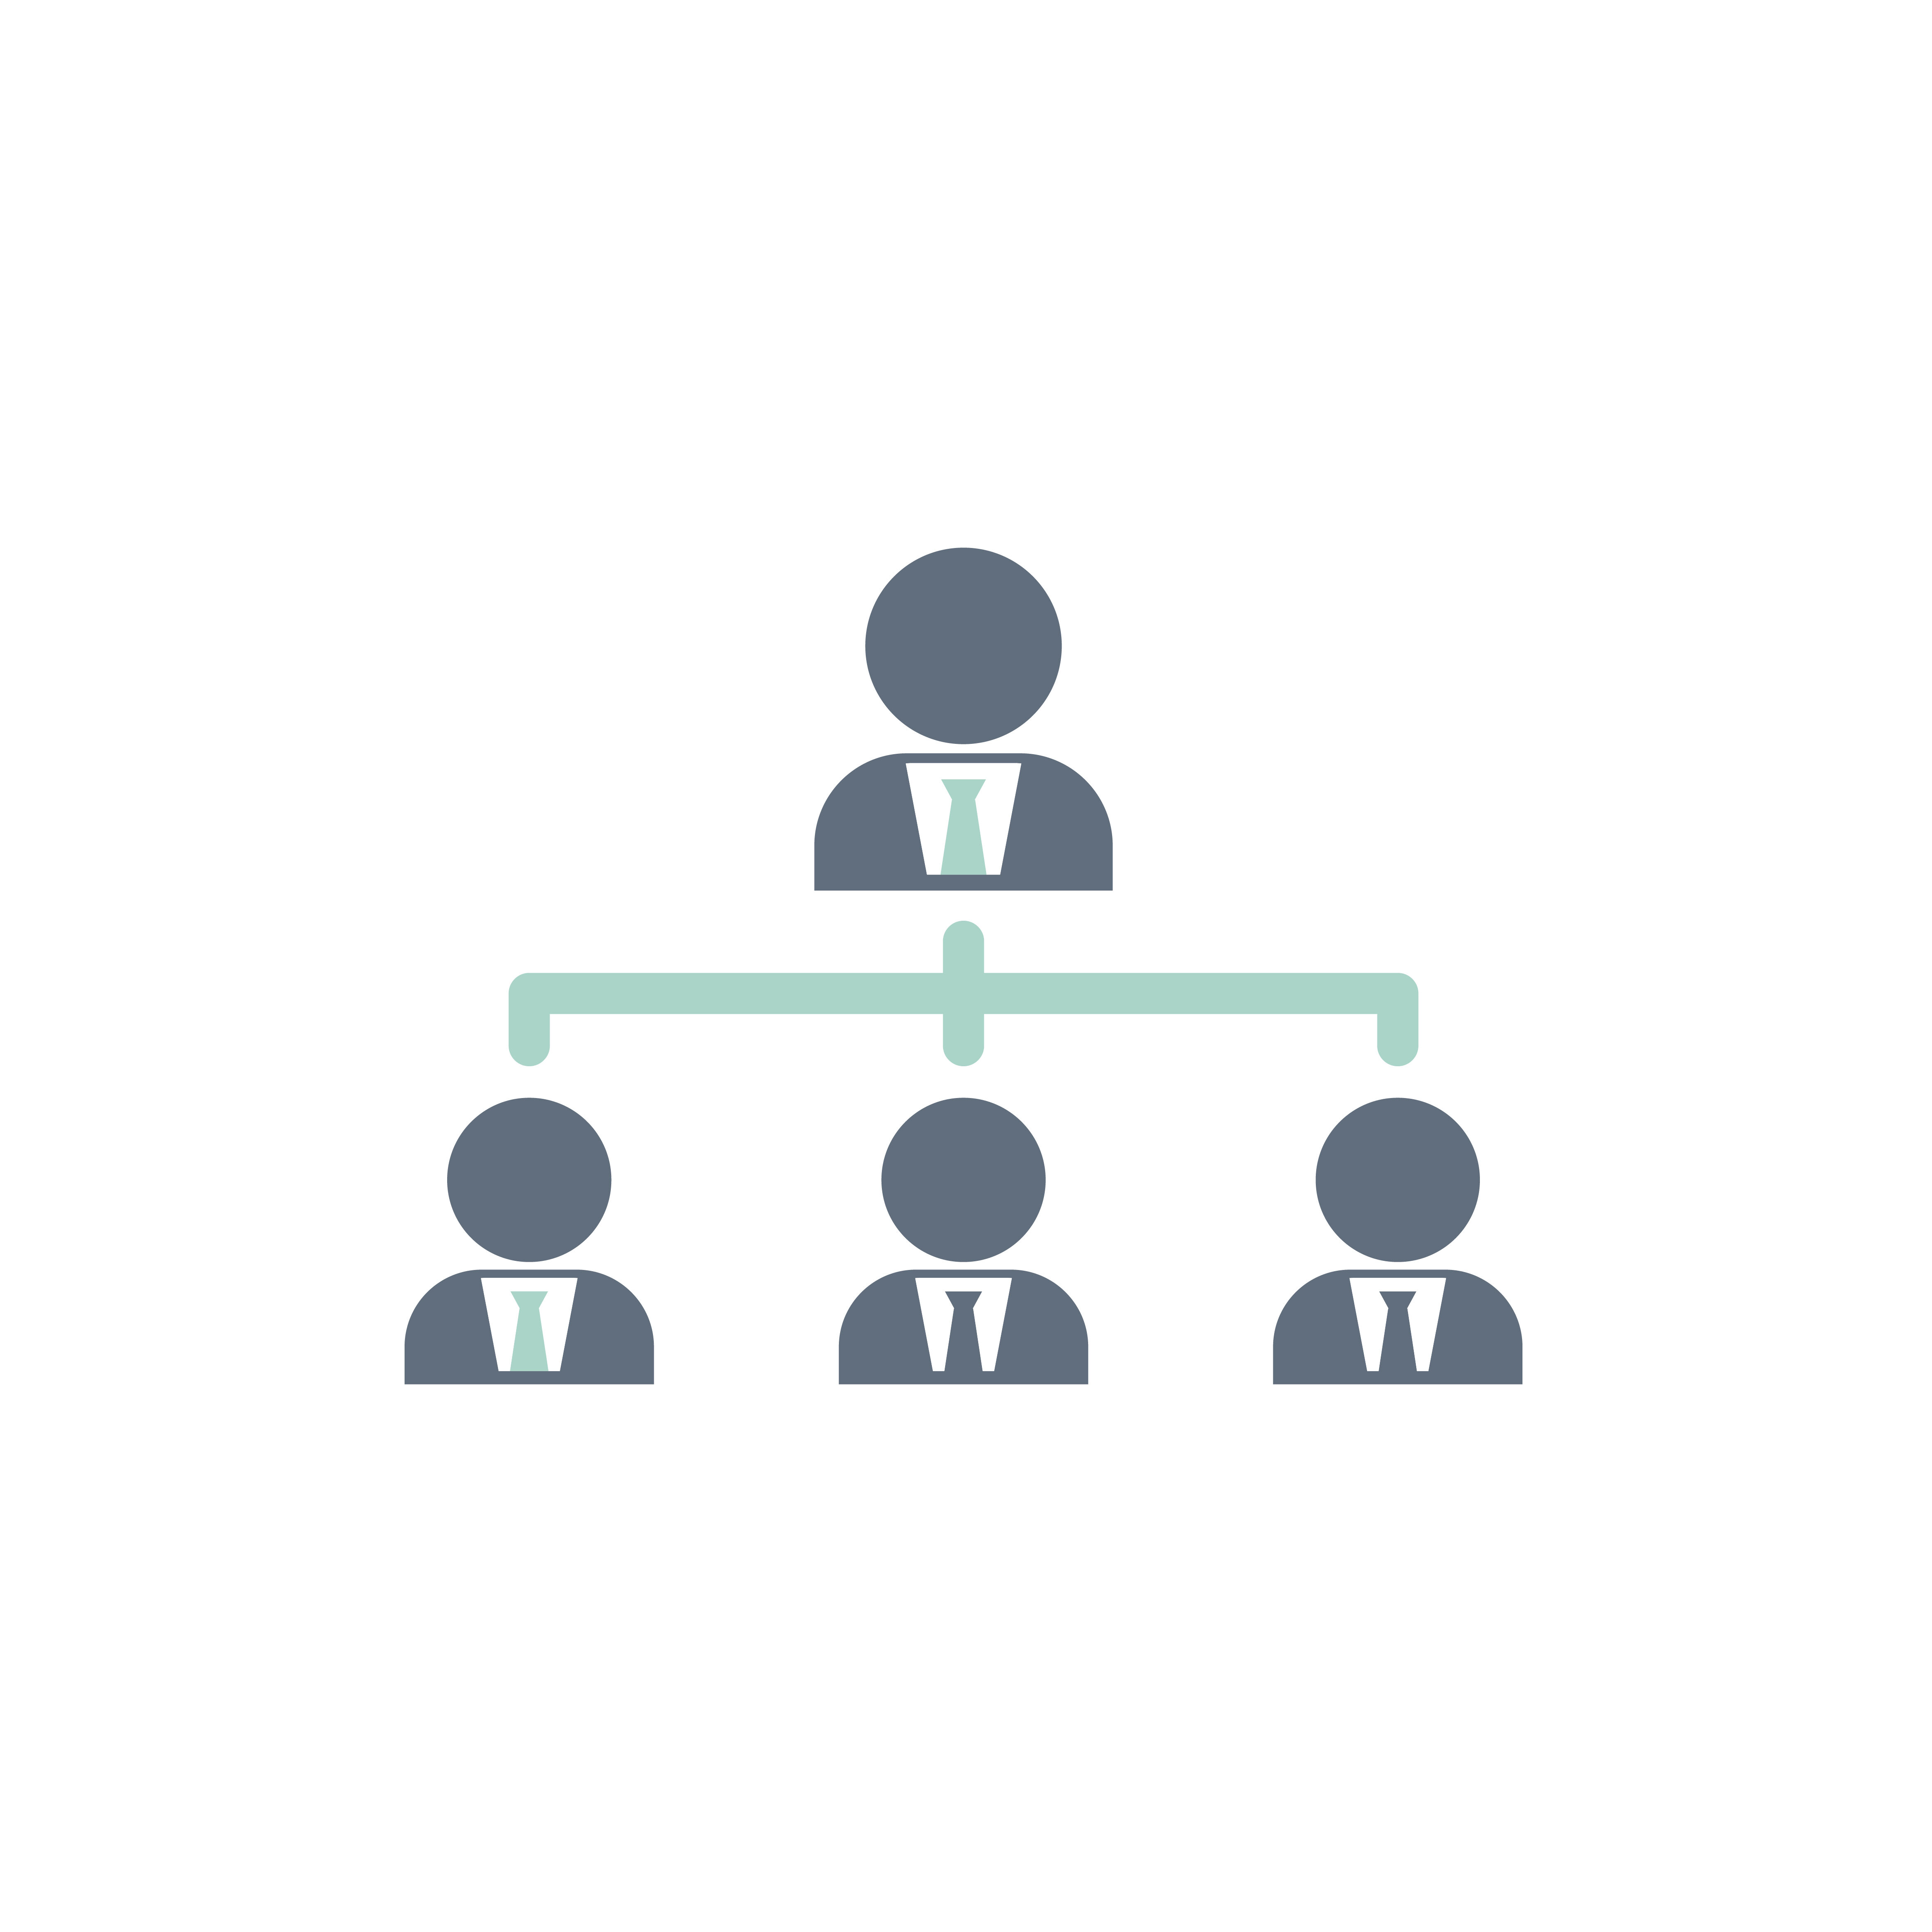 Illustration of business team structure